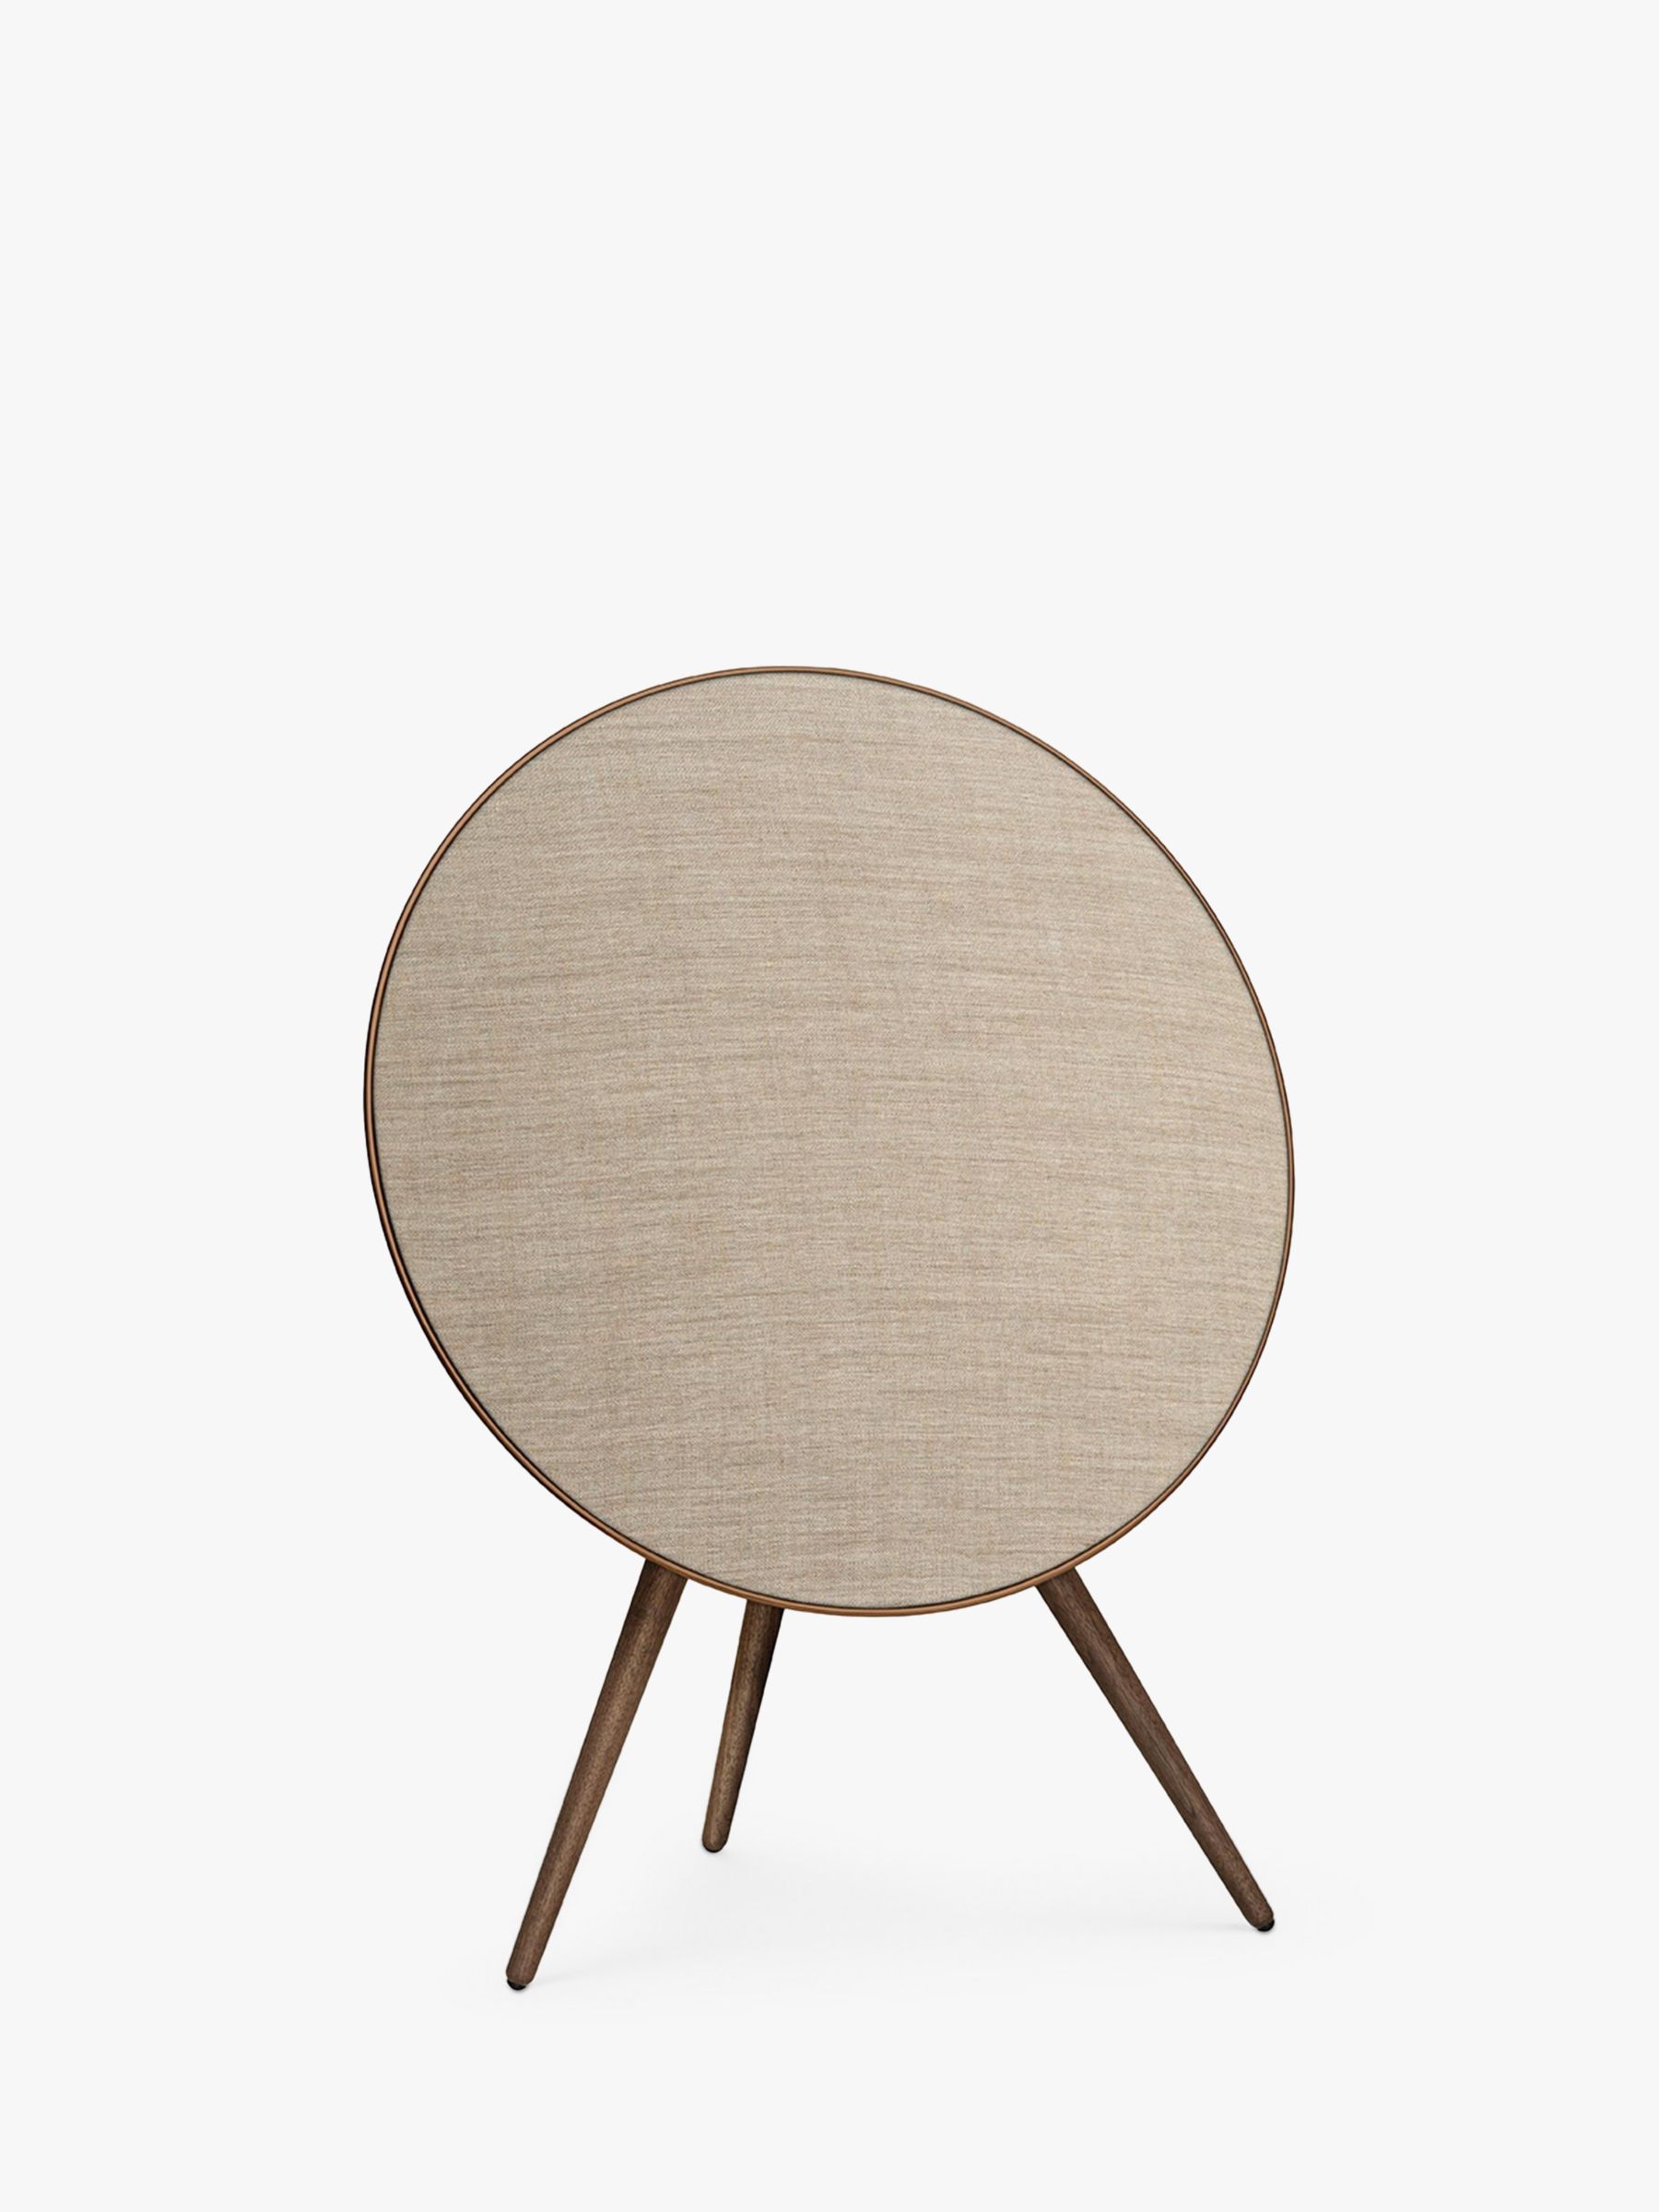 B&O PLAY by Bang & Olufsen Beoplay A9 Bluetooth, AirPlay, Google Cast & DLNA Music System